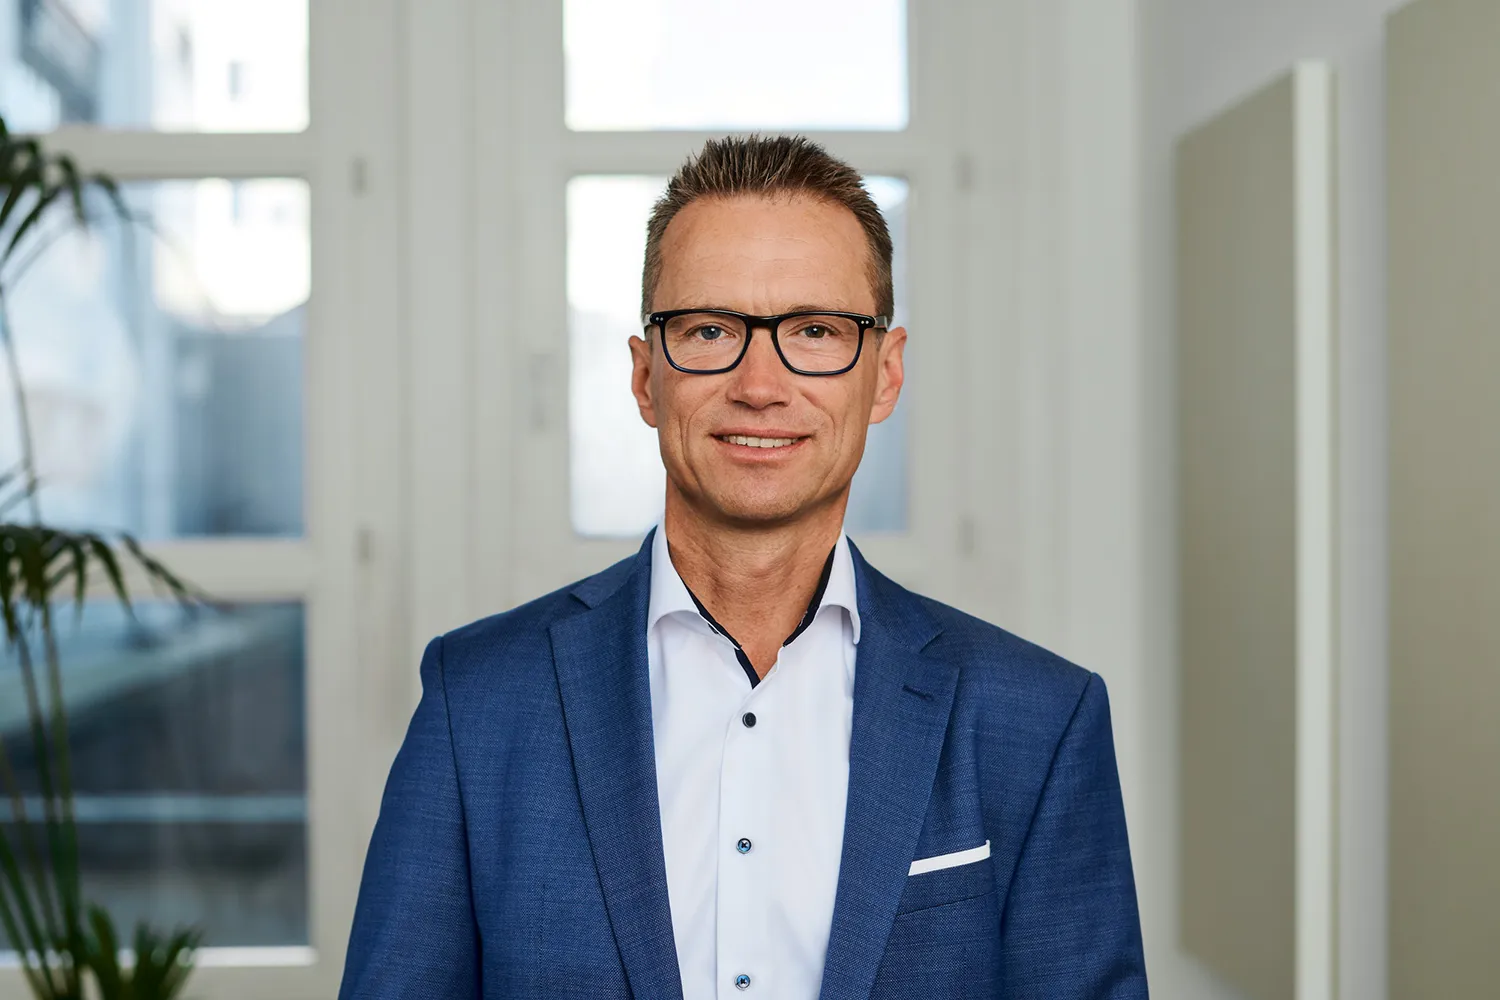 Portrait of Daniel Kunkel, who joined ubitricity as CEO in 2022 after being part of the Shell Group for several years.